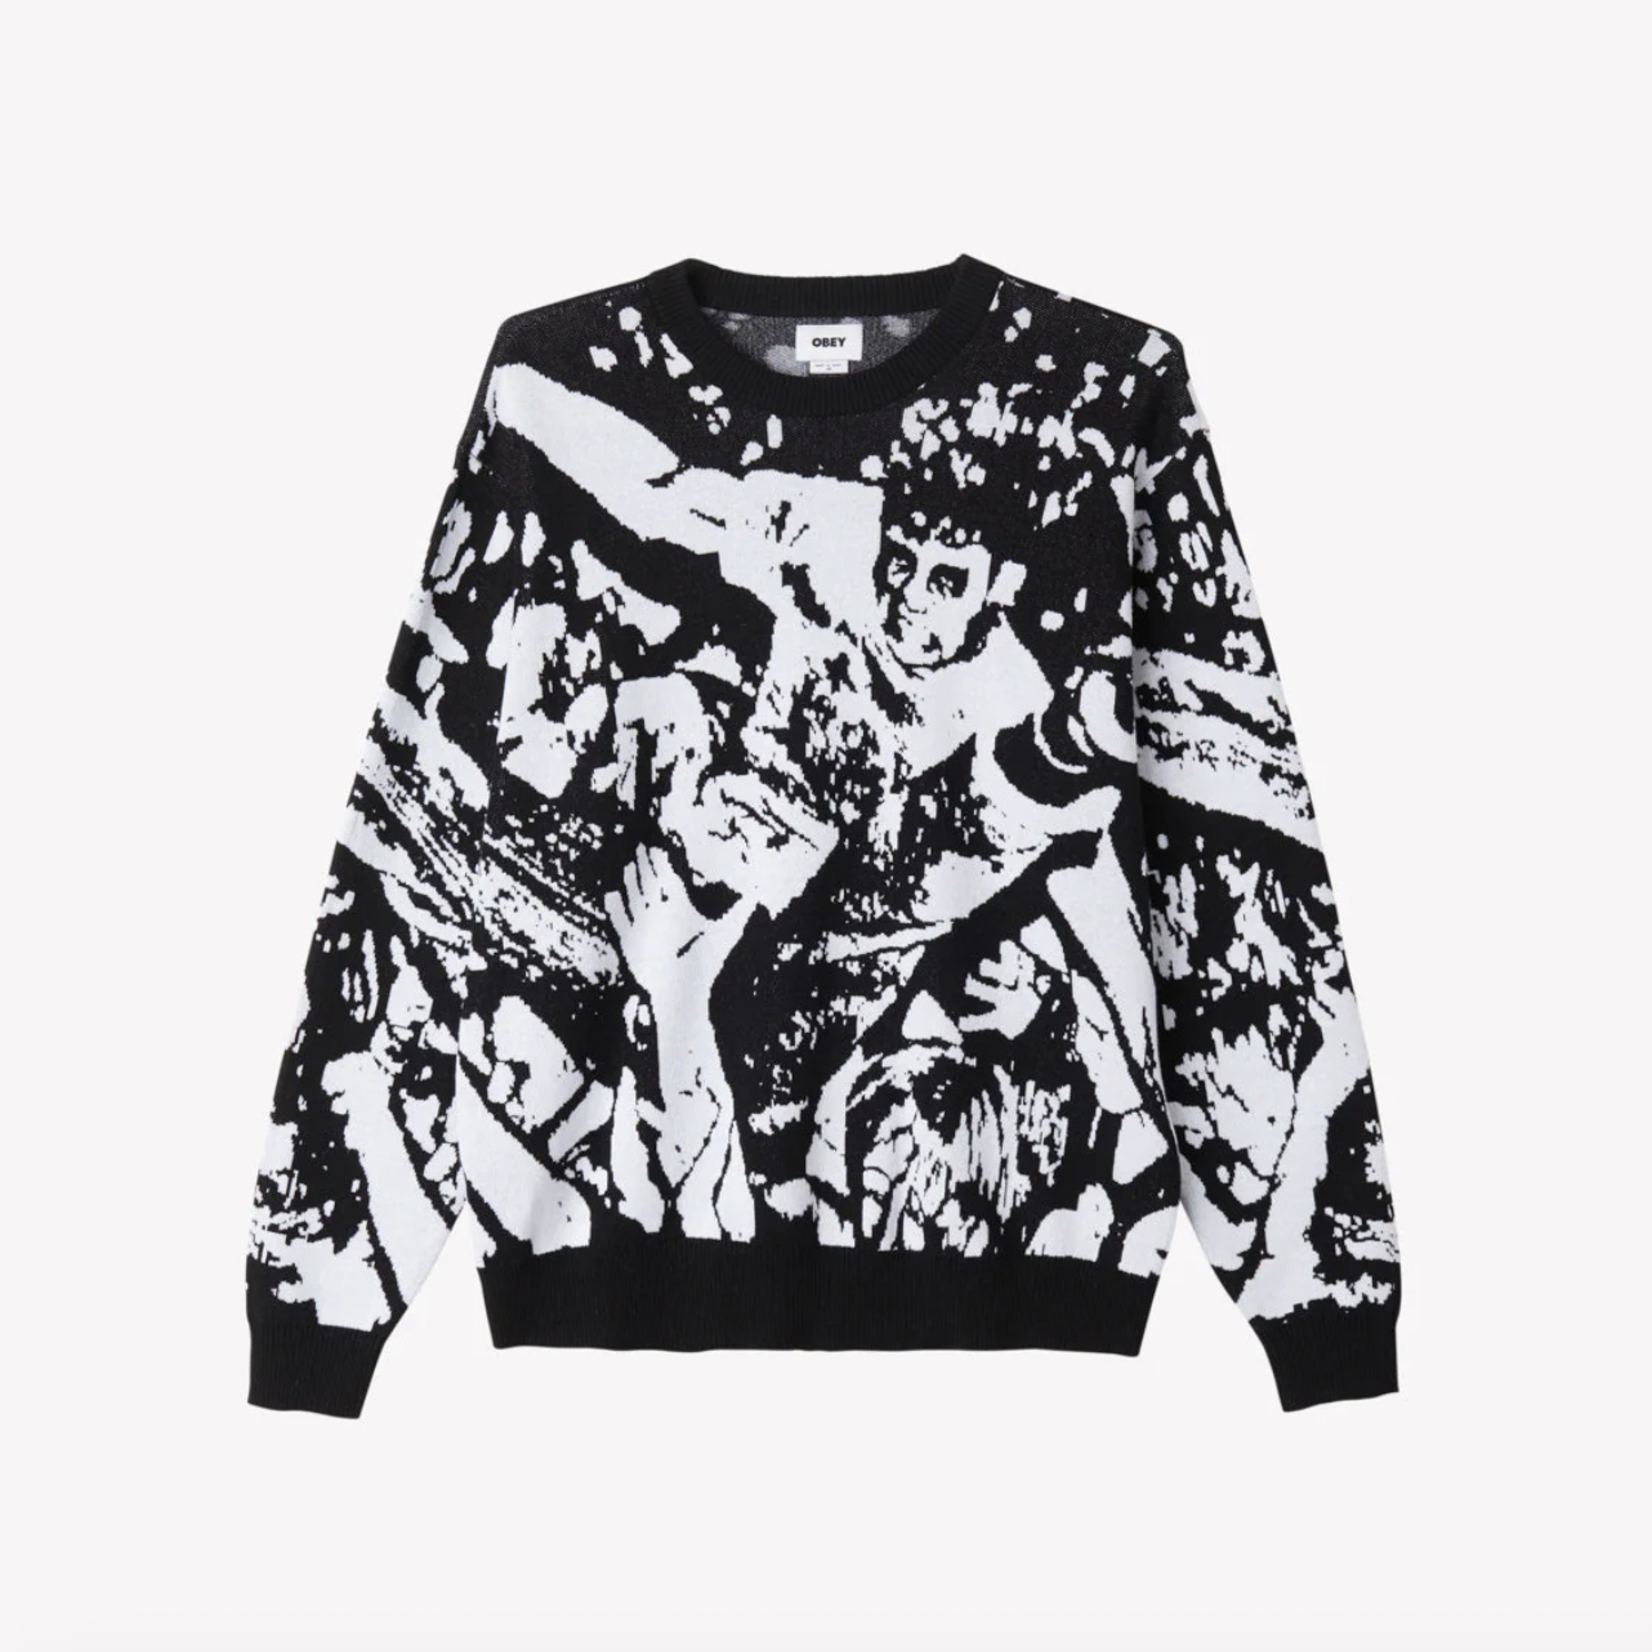 OBEY CROWD SUFING SWEATER